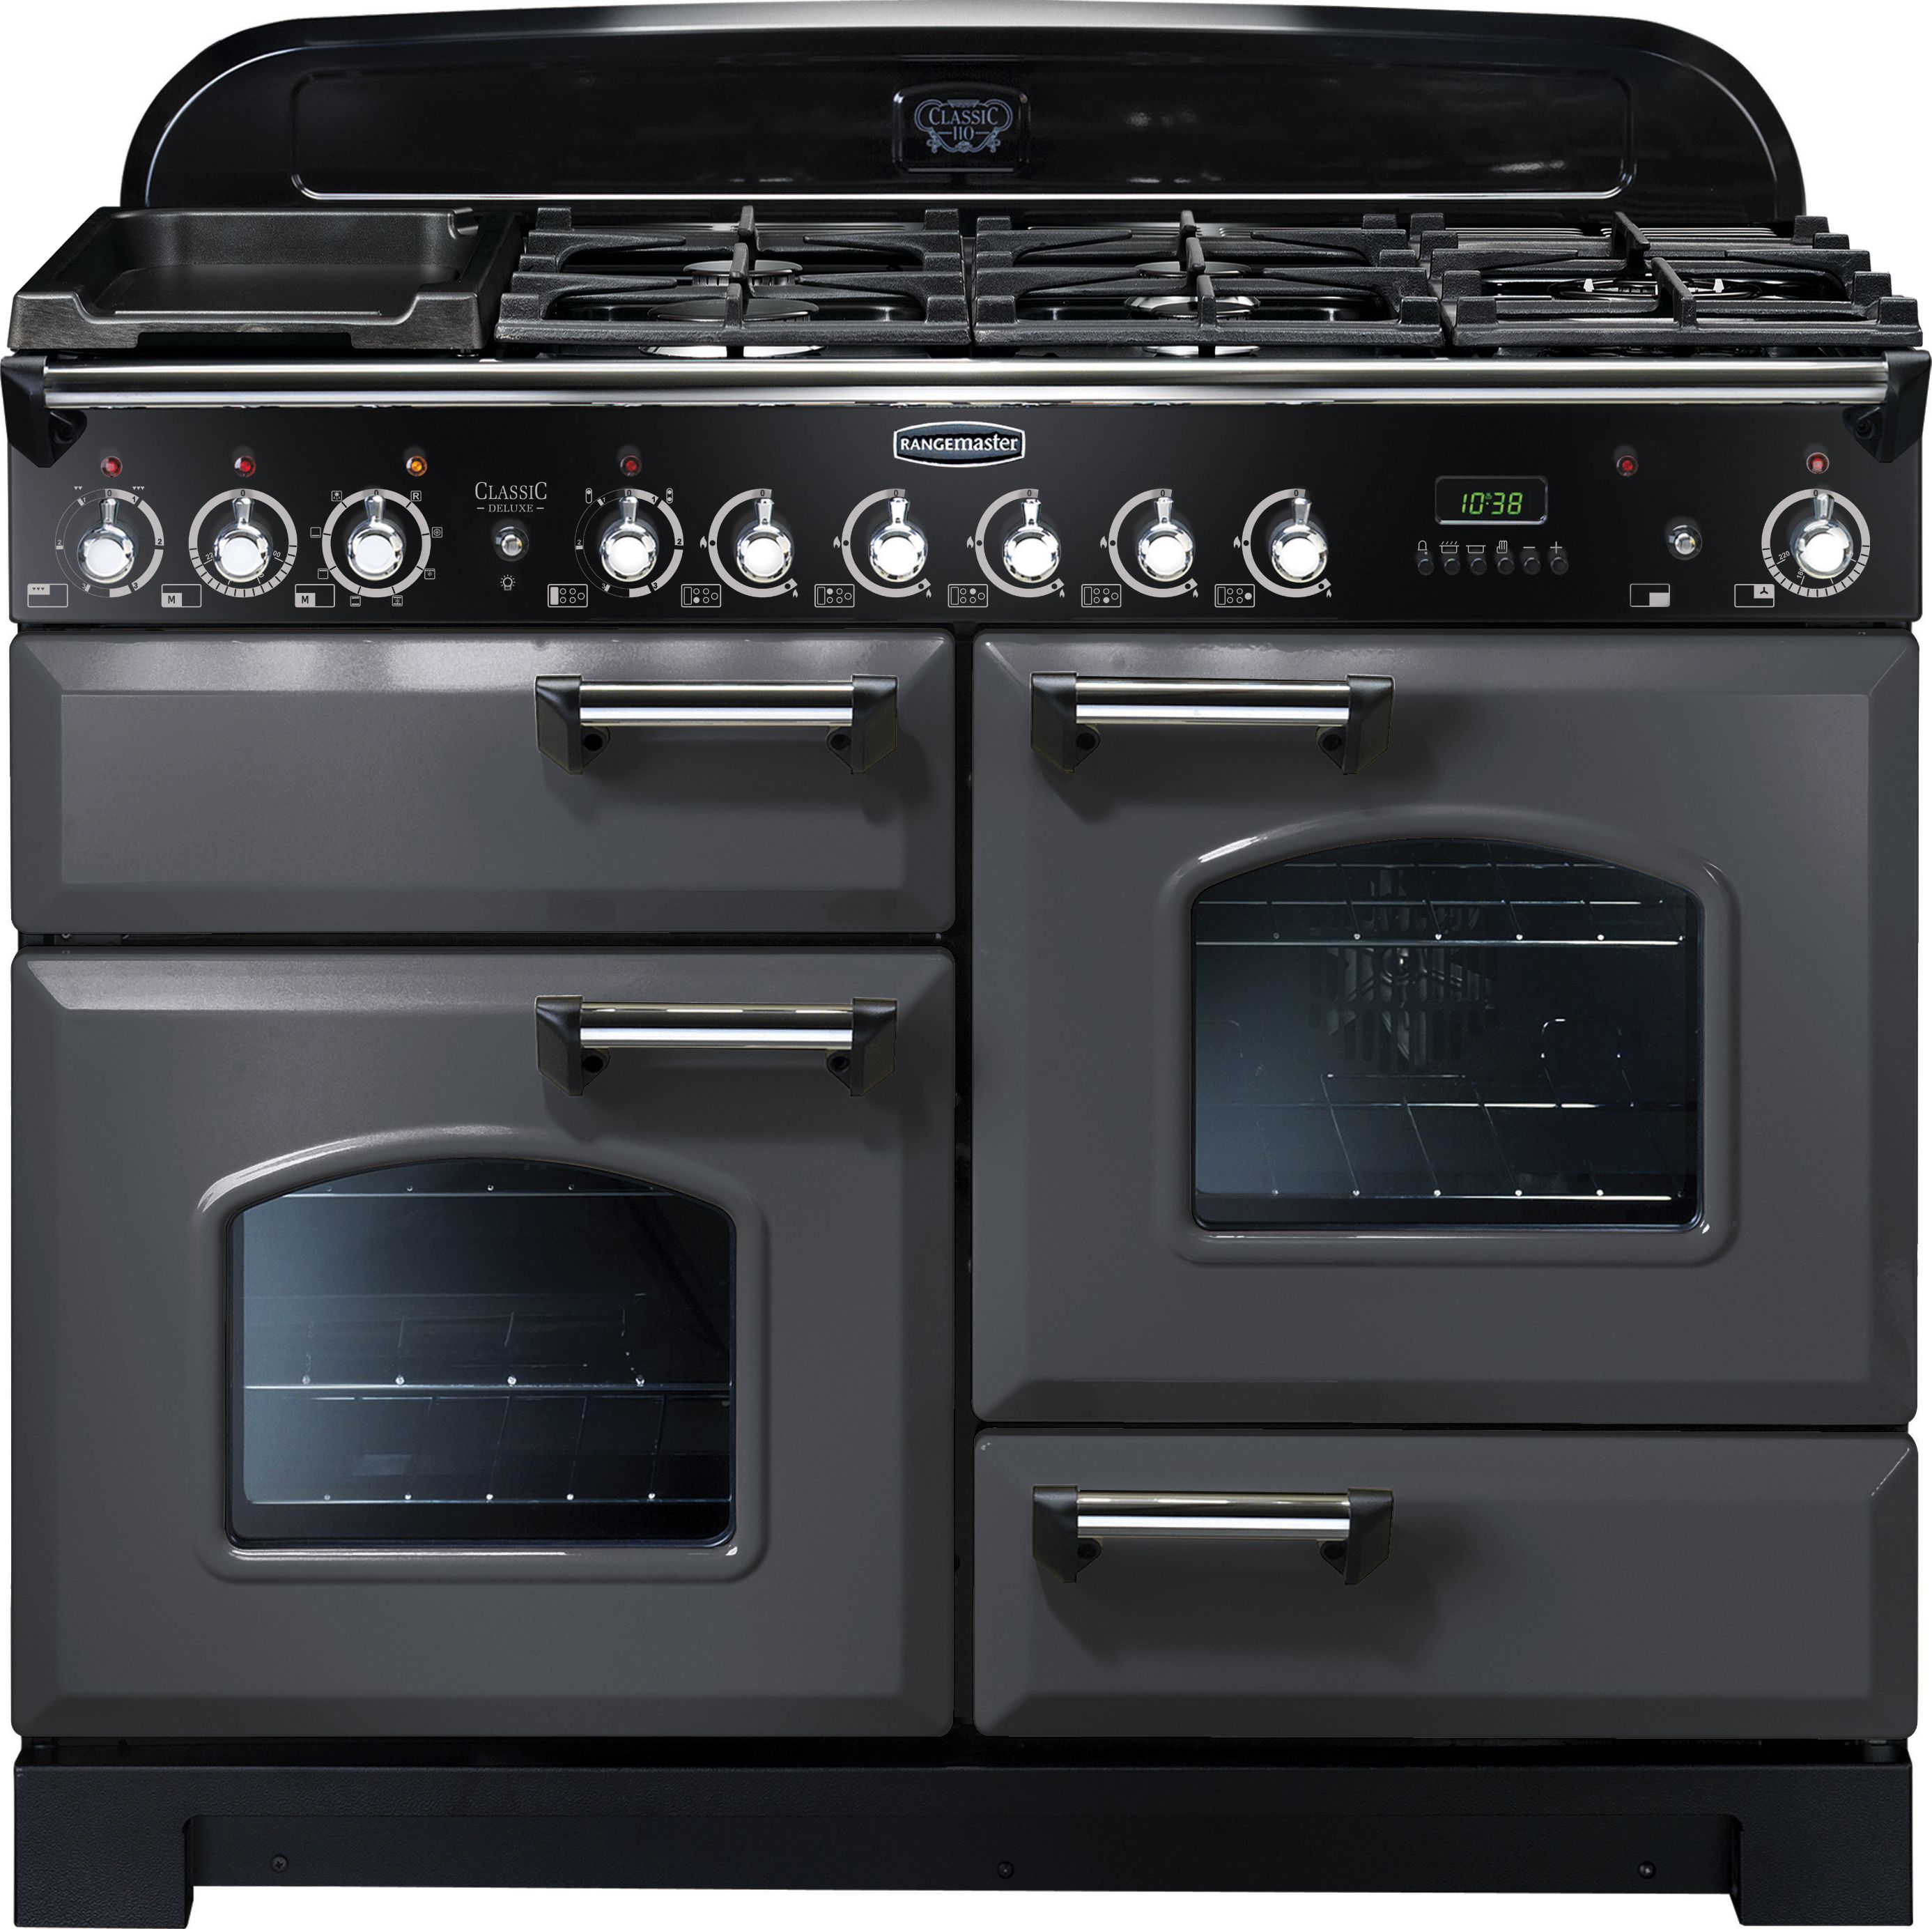 Rangemaster Classic Deluxe CDL110DFFSL/C 110cm Dual Fuel Range Cooker - Slate Grey / Chrome - A/A Rated, Grey